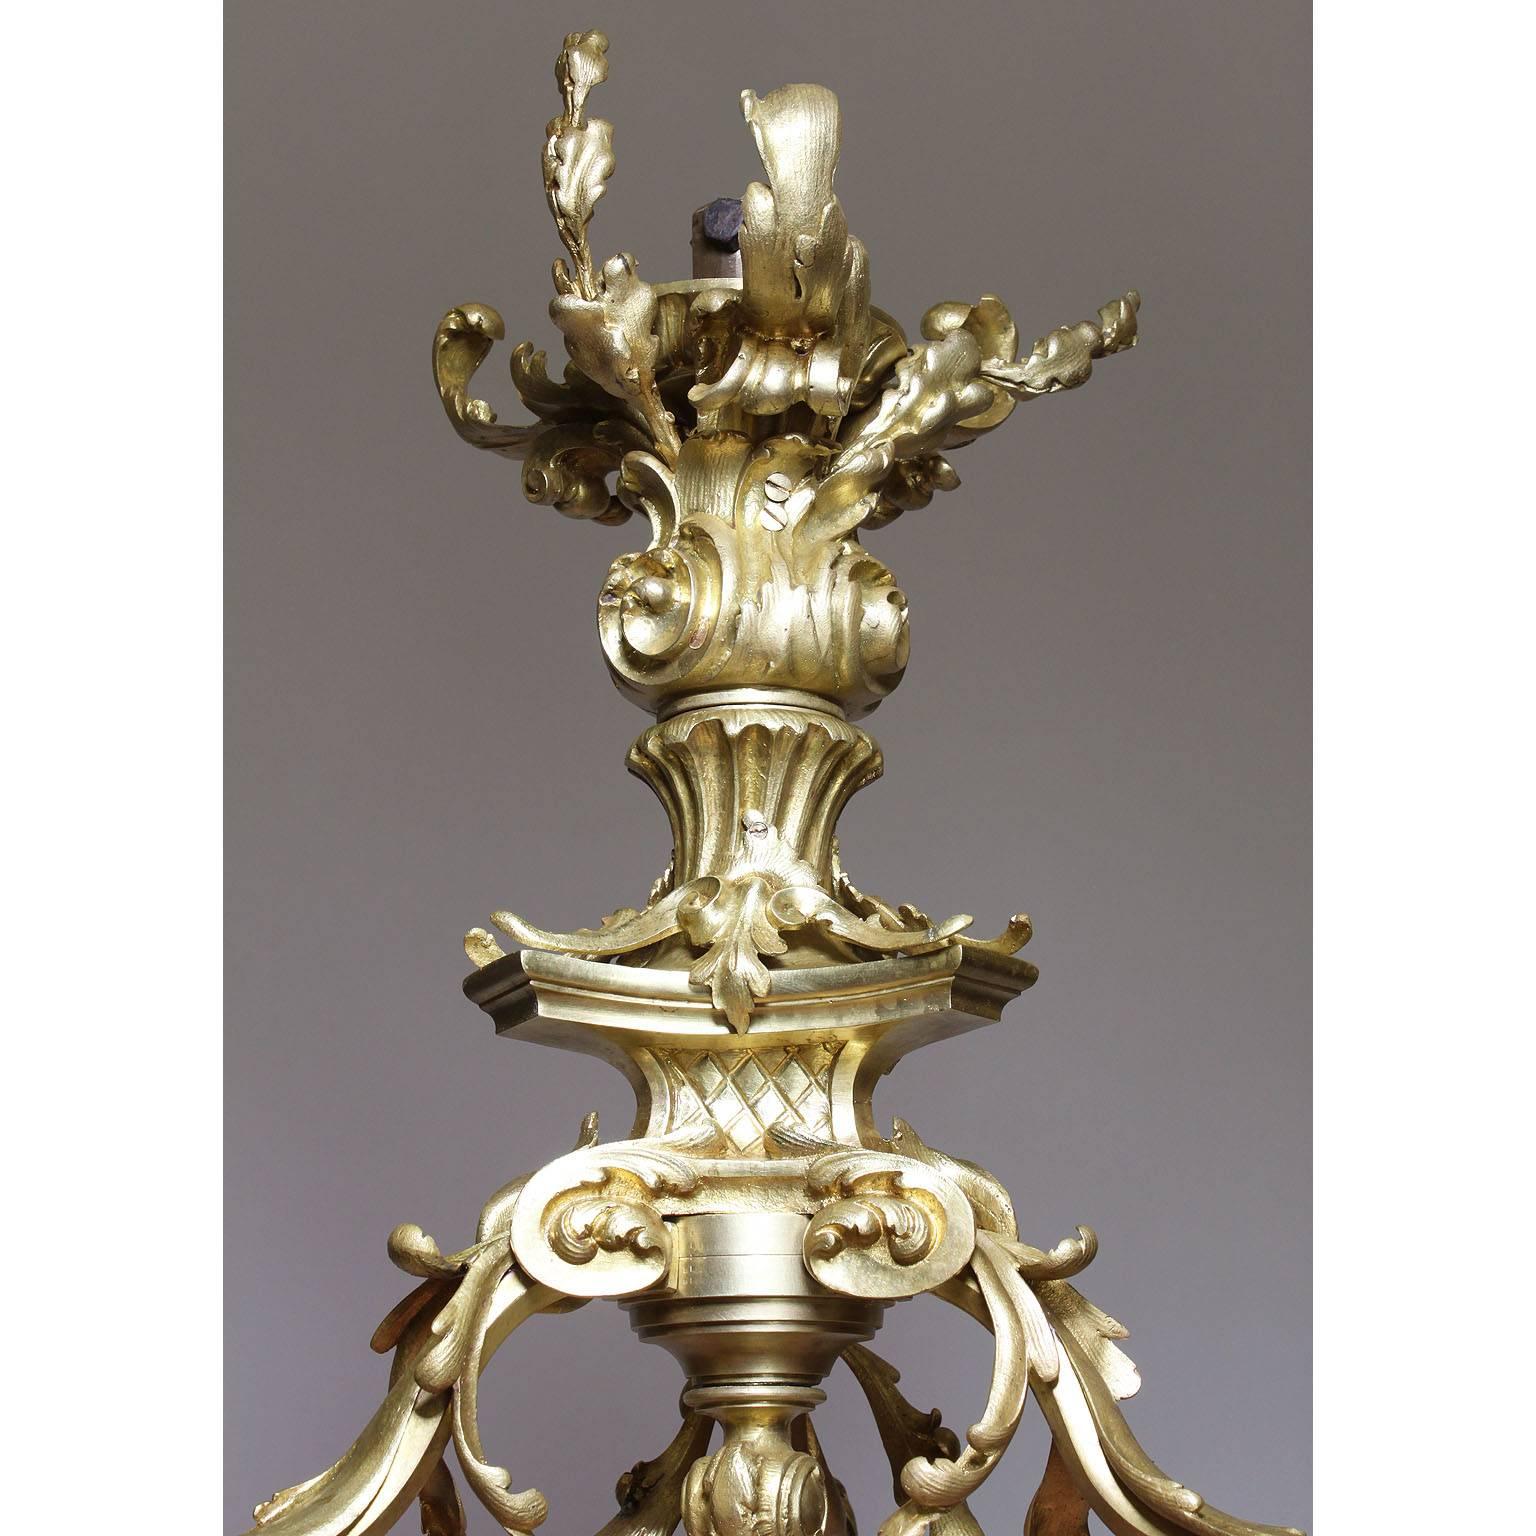 French Belle Époque Rococo Style Gilt-Bronze and Frosted Glass Shades Chandelier For Sale 3